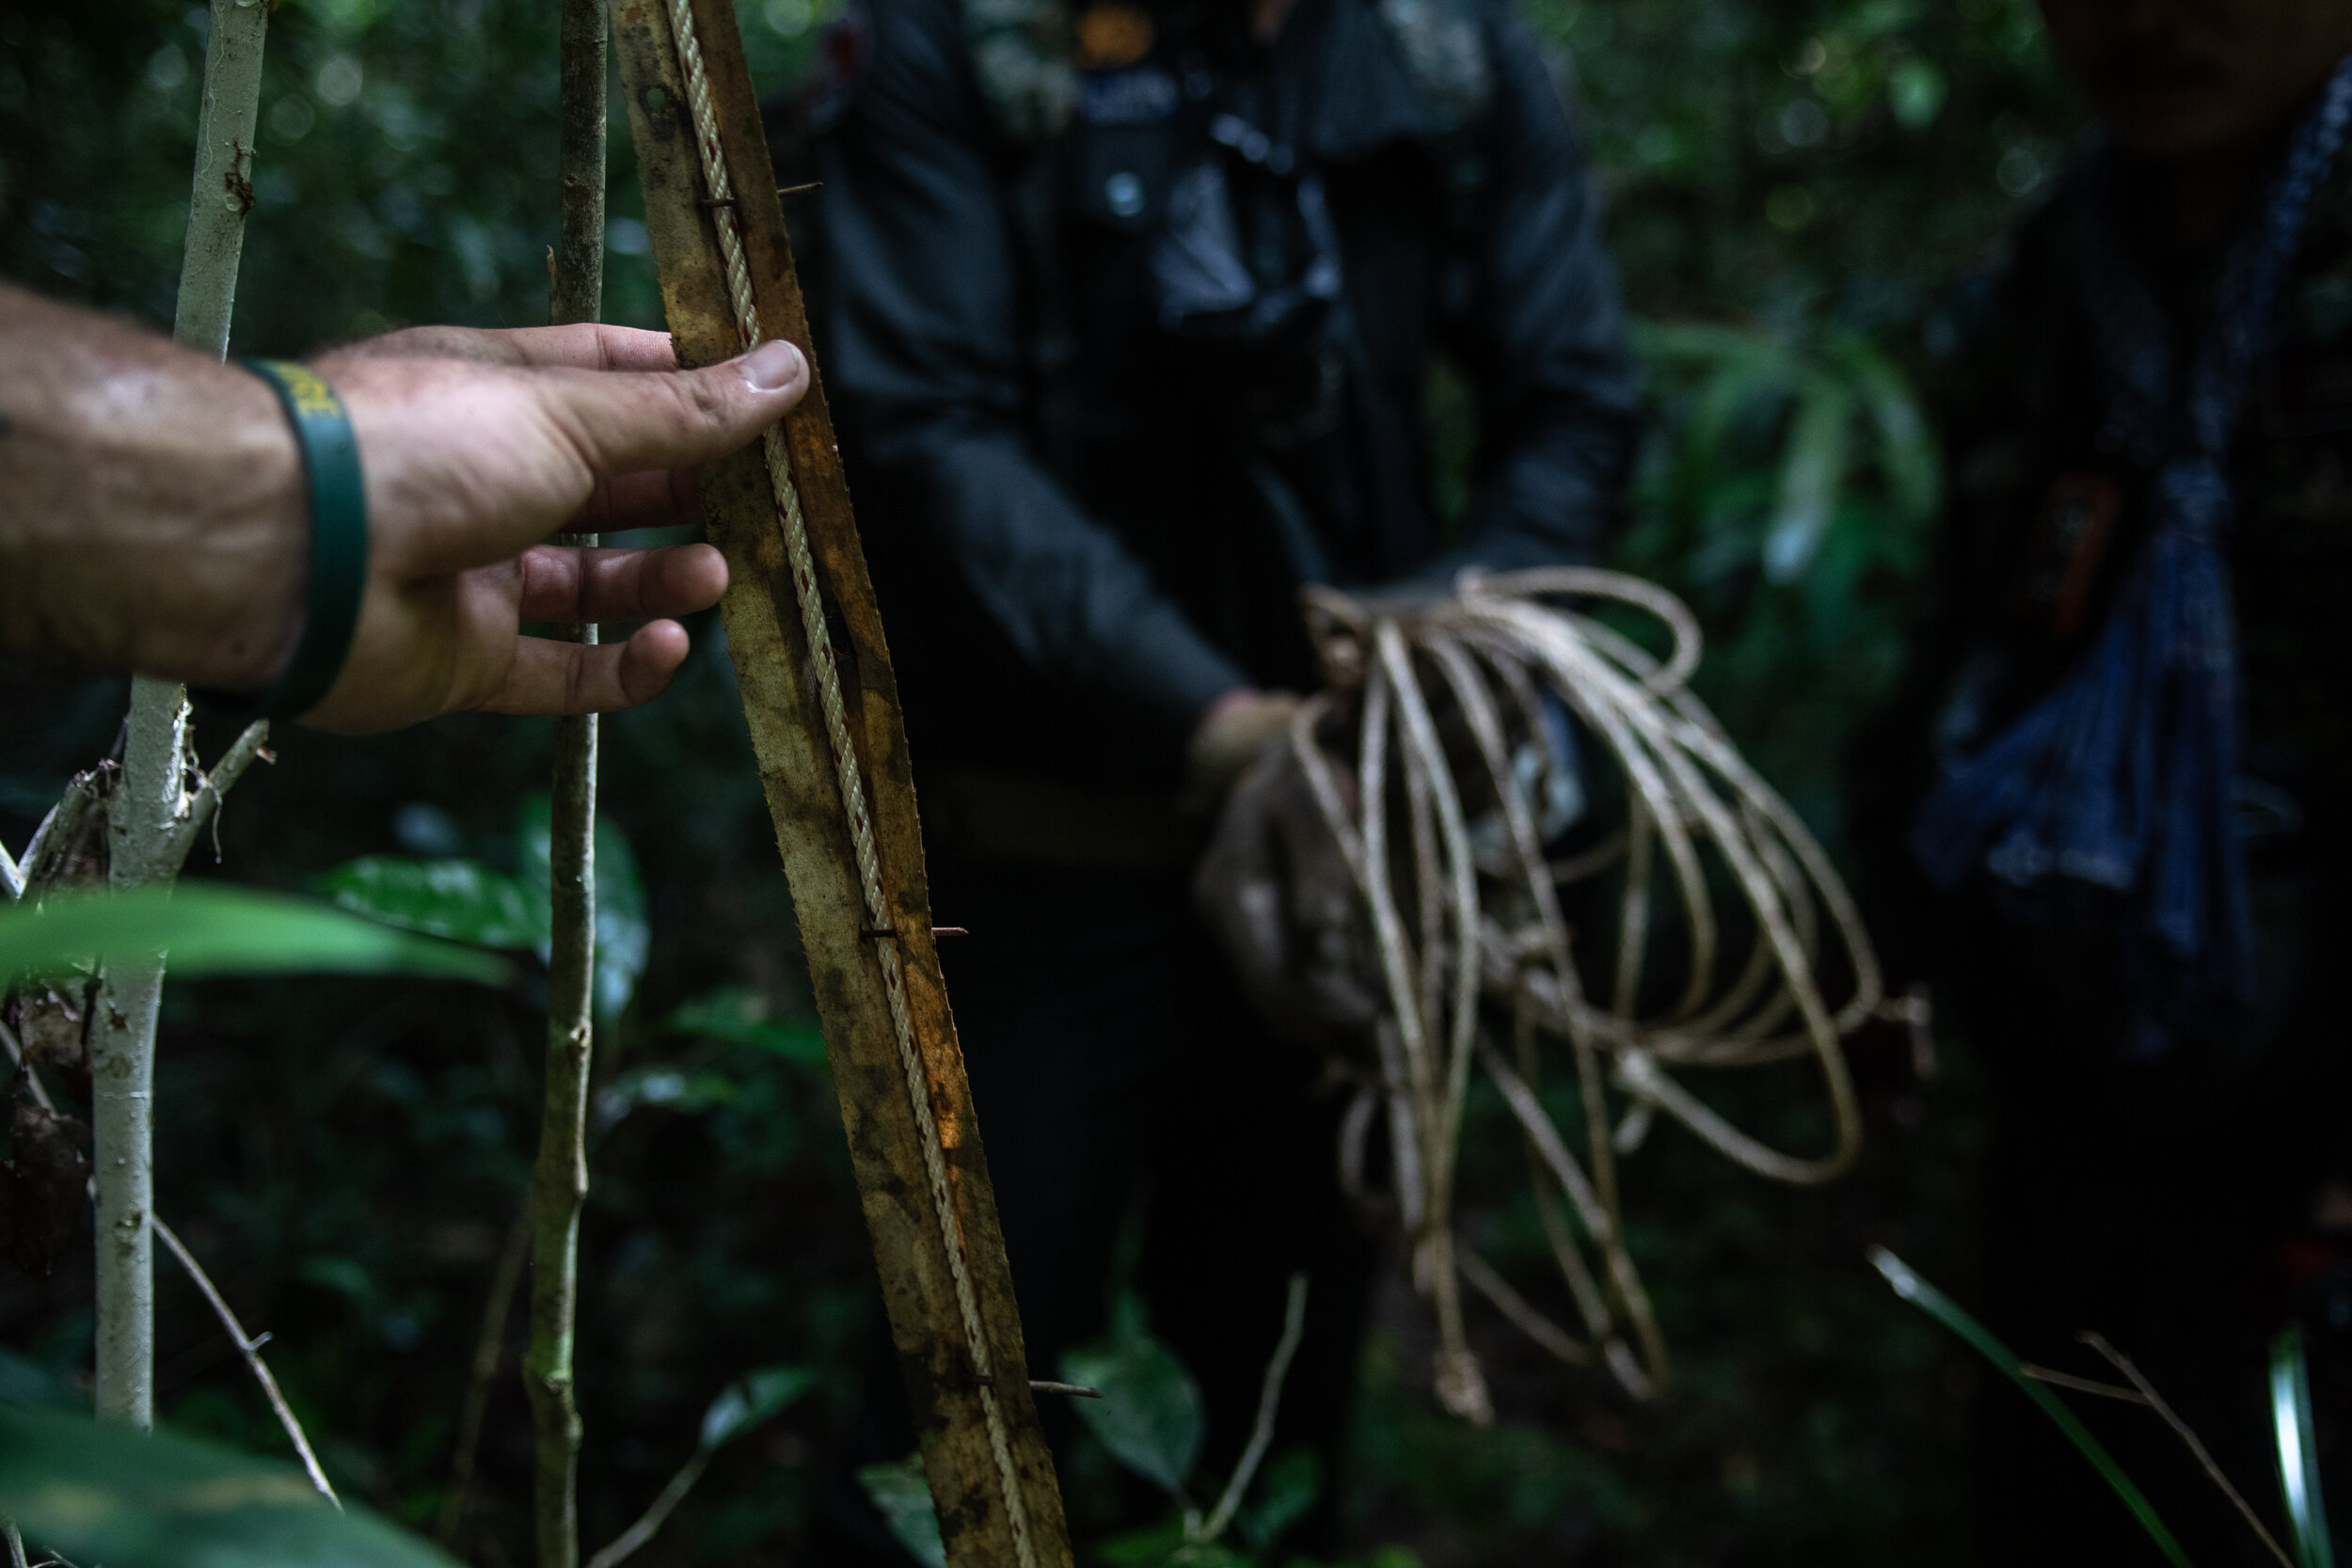  Wildlife Alliance rangers dismantle a snare intricately camouflaged by poachers to hide them from animals and patrols alike. This snare is hidden underneath a long leaf, pinned into shape by thorns from a palm tree. Another method used by poachers i